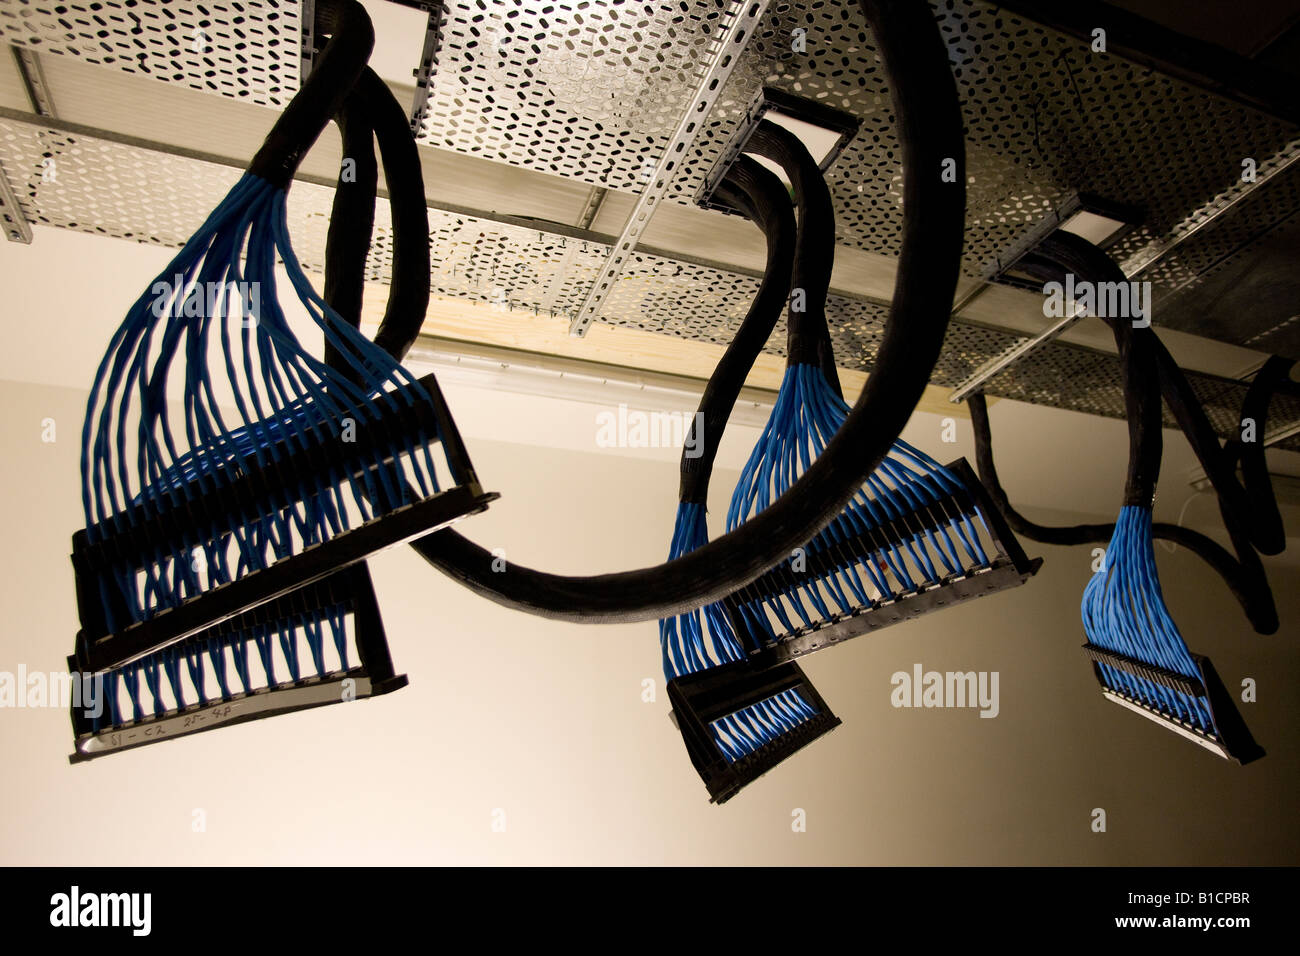 Data cables already attached to connectors hang from the ceiling of a comms room at new London offices under construction. Stock Photo